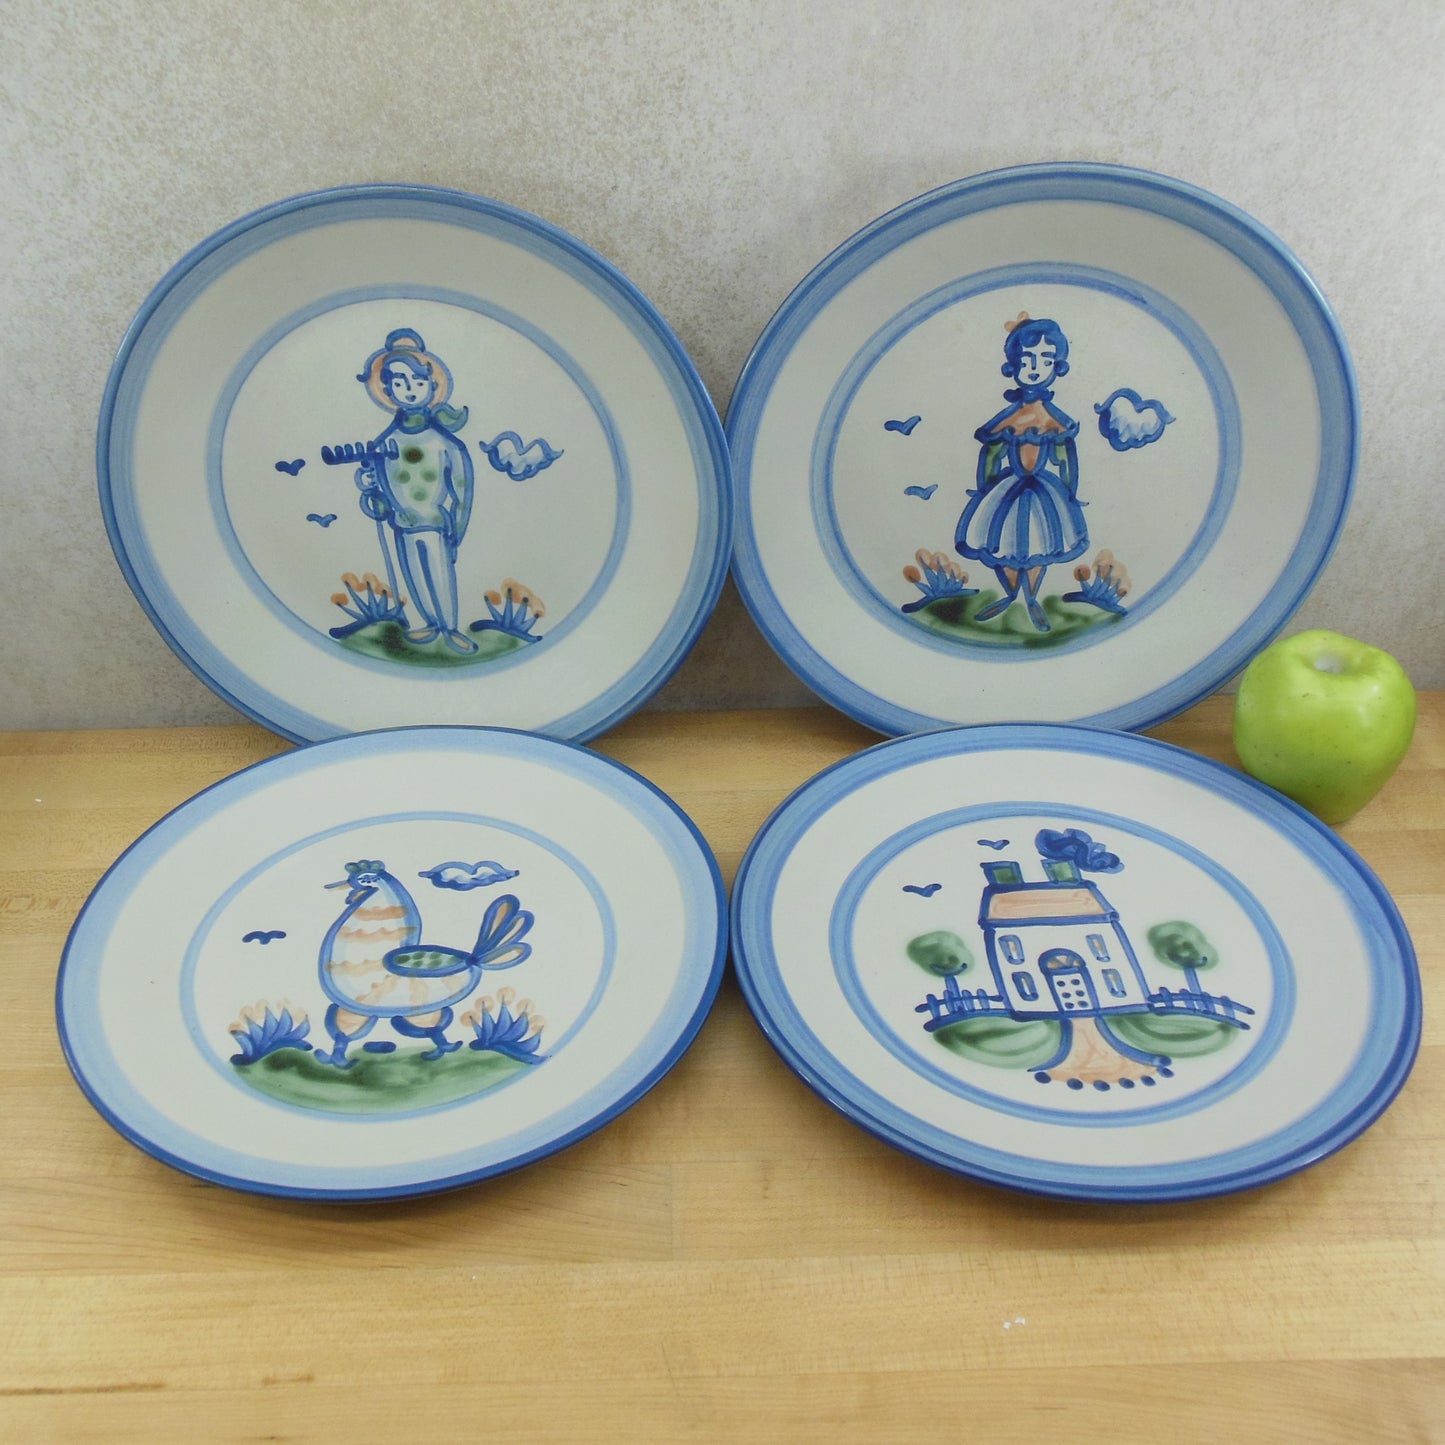 M.A. Hadley Pottery 4 Set Dinner Plates 11" House Chicken Farmer Man Woman - Discounted